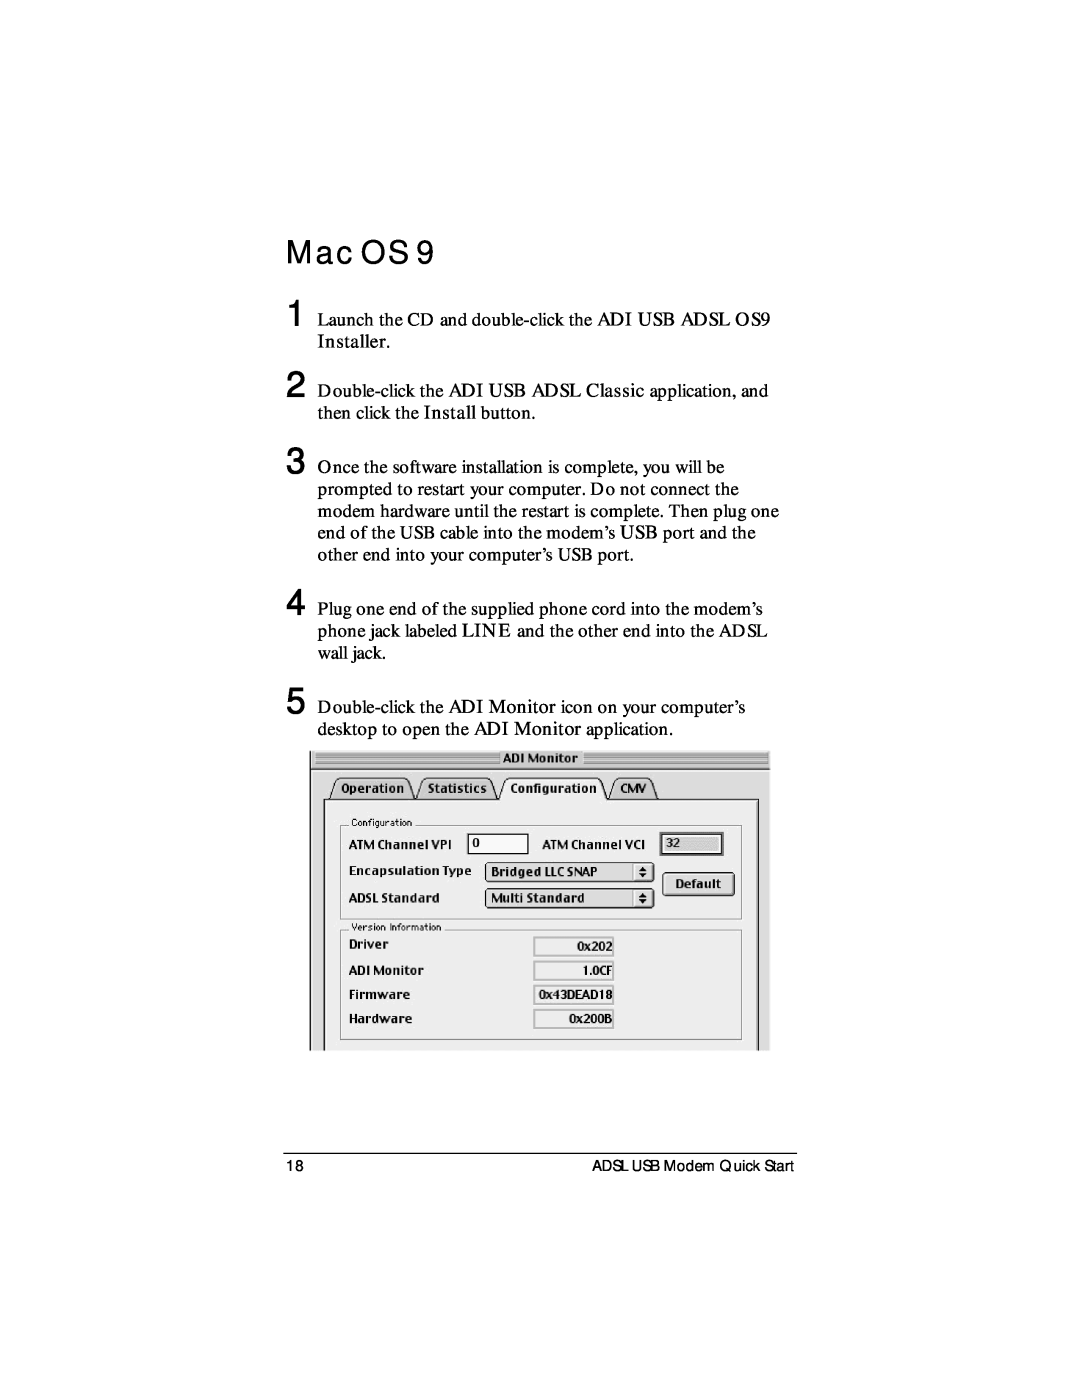 Zoom None quick start Mac OS, Launch the CD and double-click the ADI USB ADSL OS9 Installer, ADSL USB Modem Quick Start 